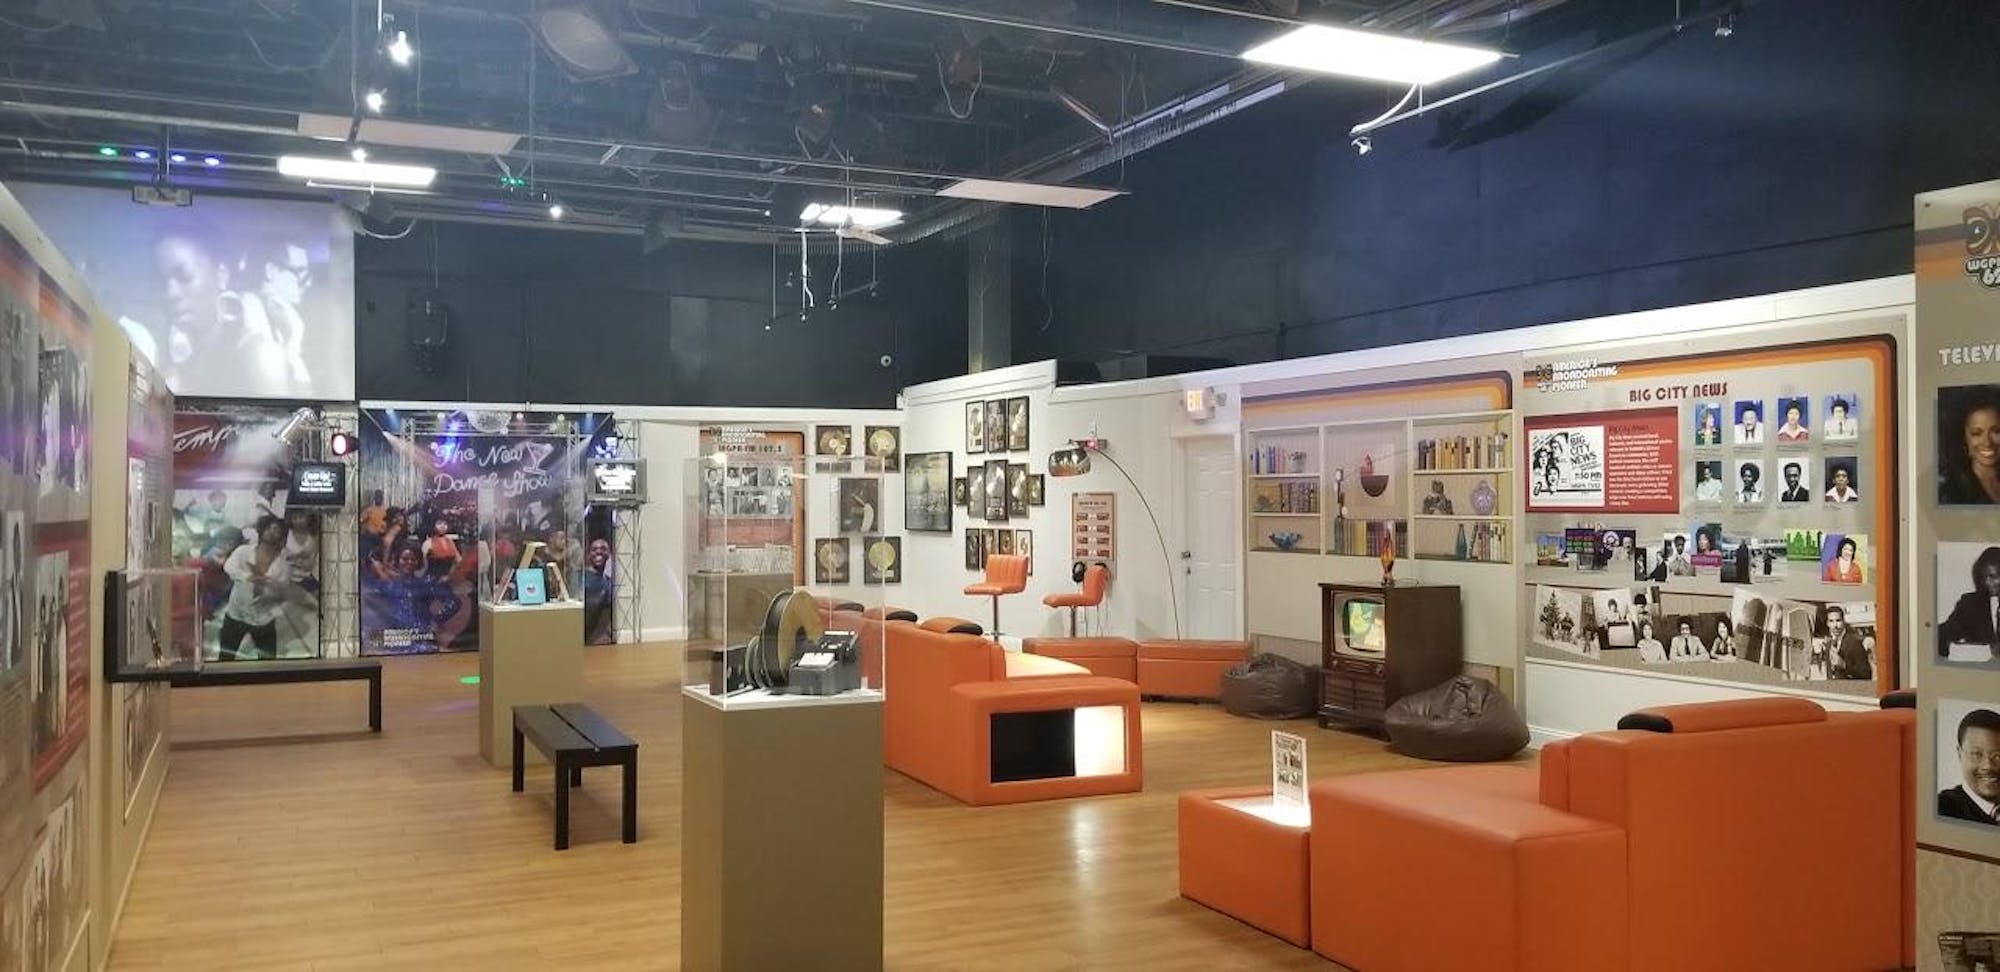 WGPR and the William V. Banks Broadcast Museum